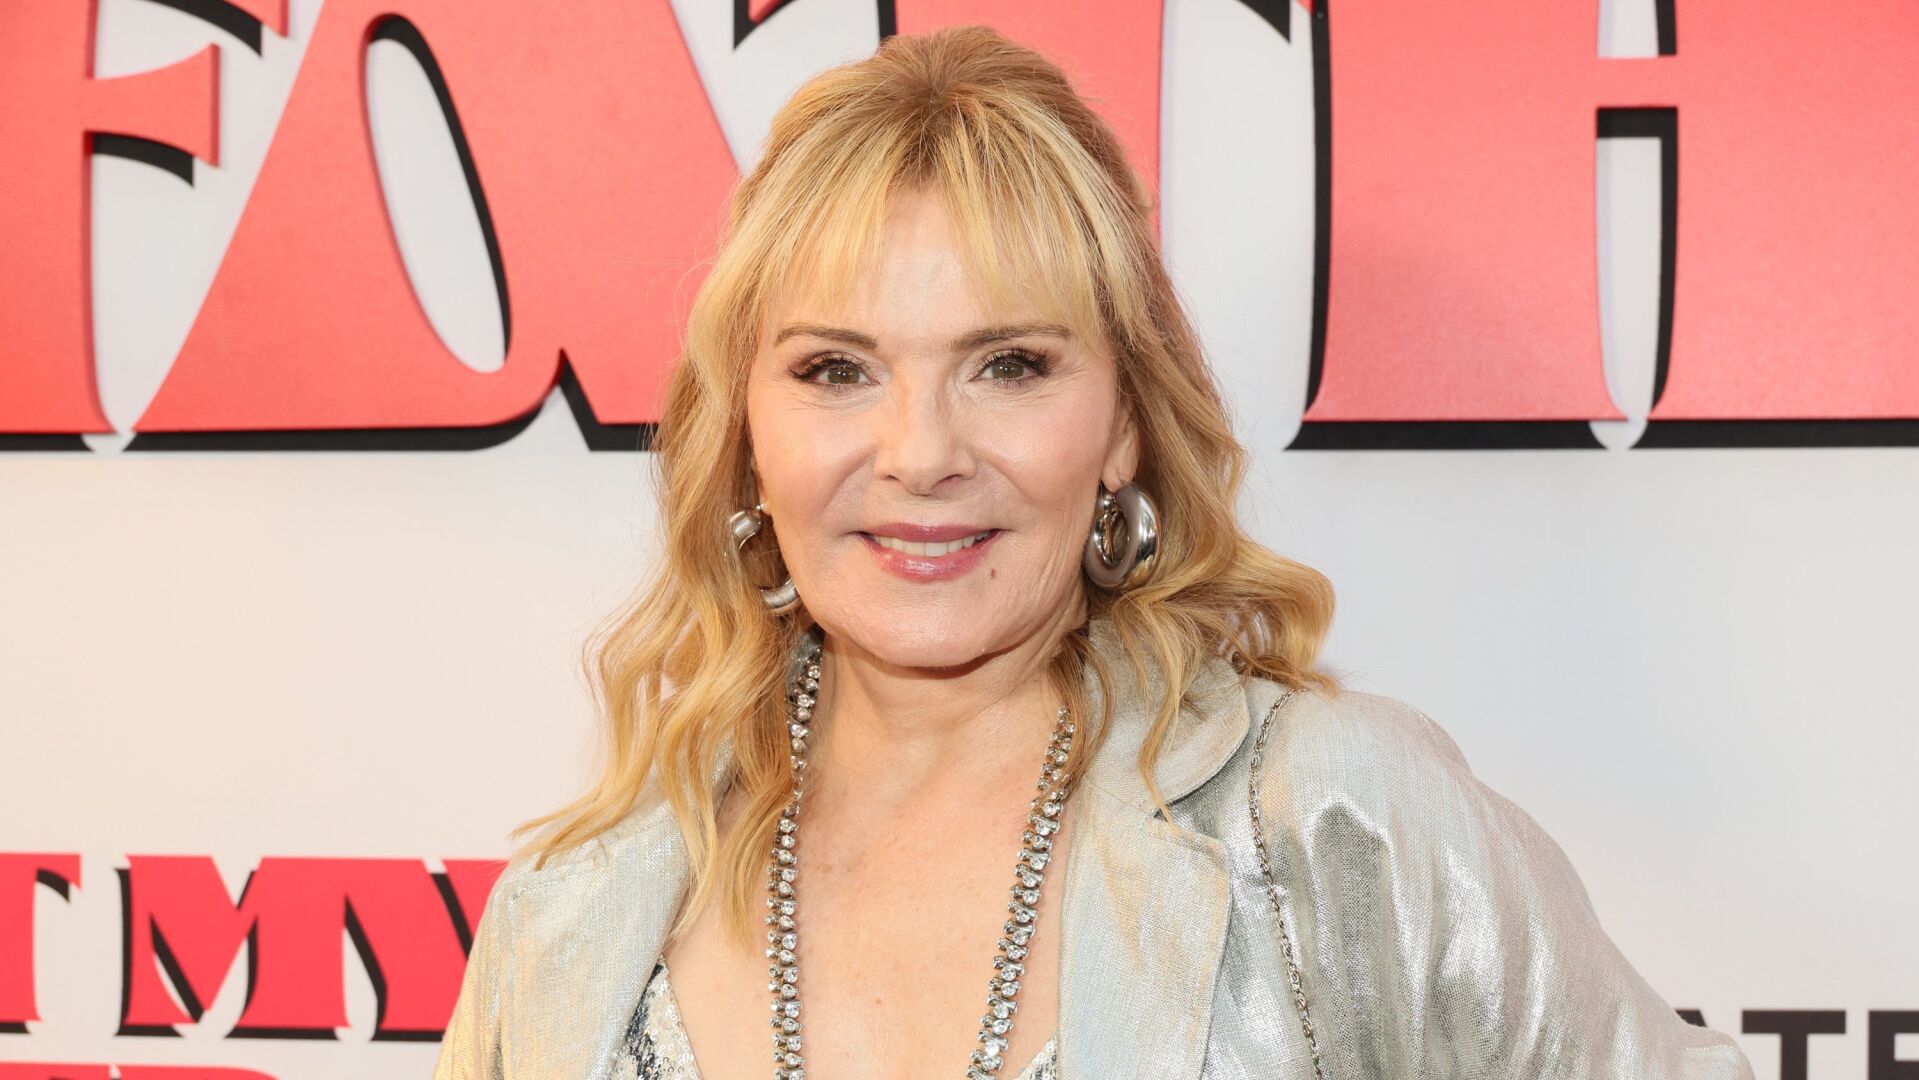 Kim Cattrall will indeed reprise the role of Samantha Jones in Sex and the City reboot National kdrv image photo